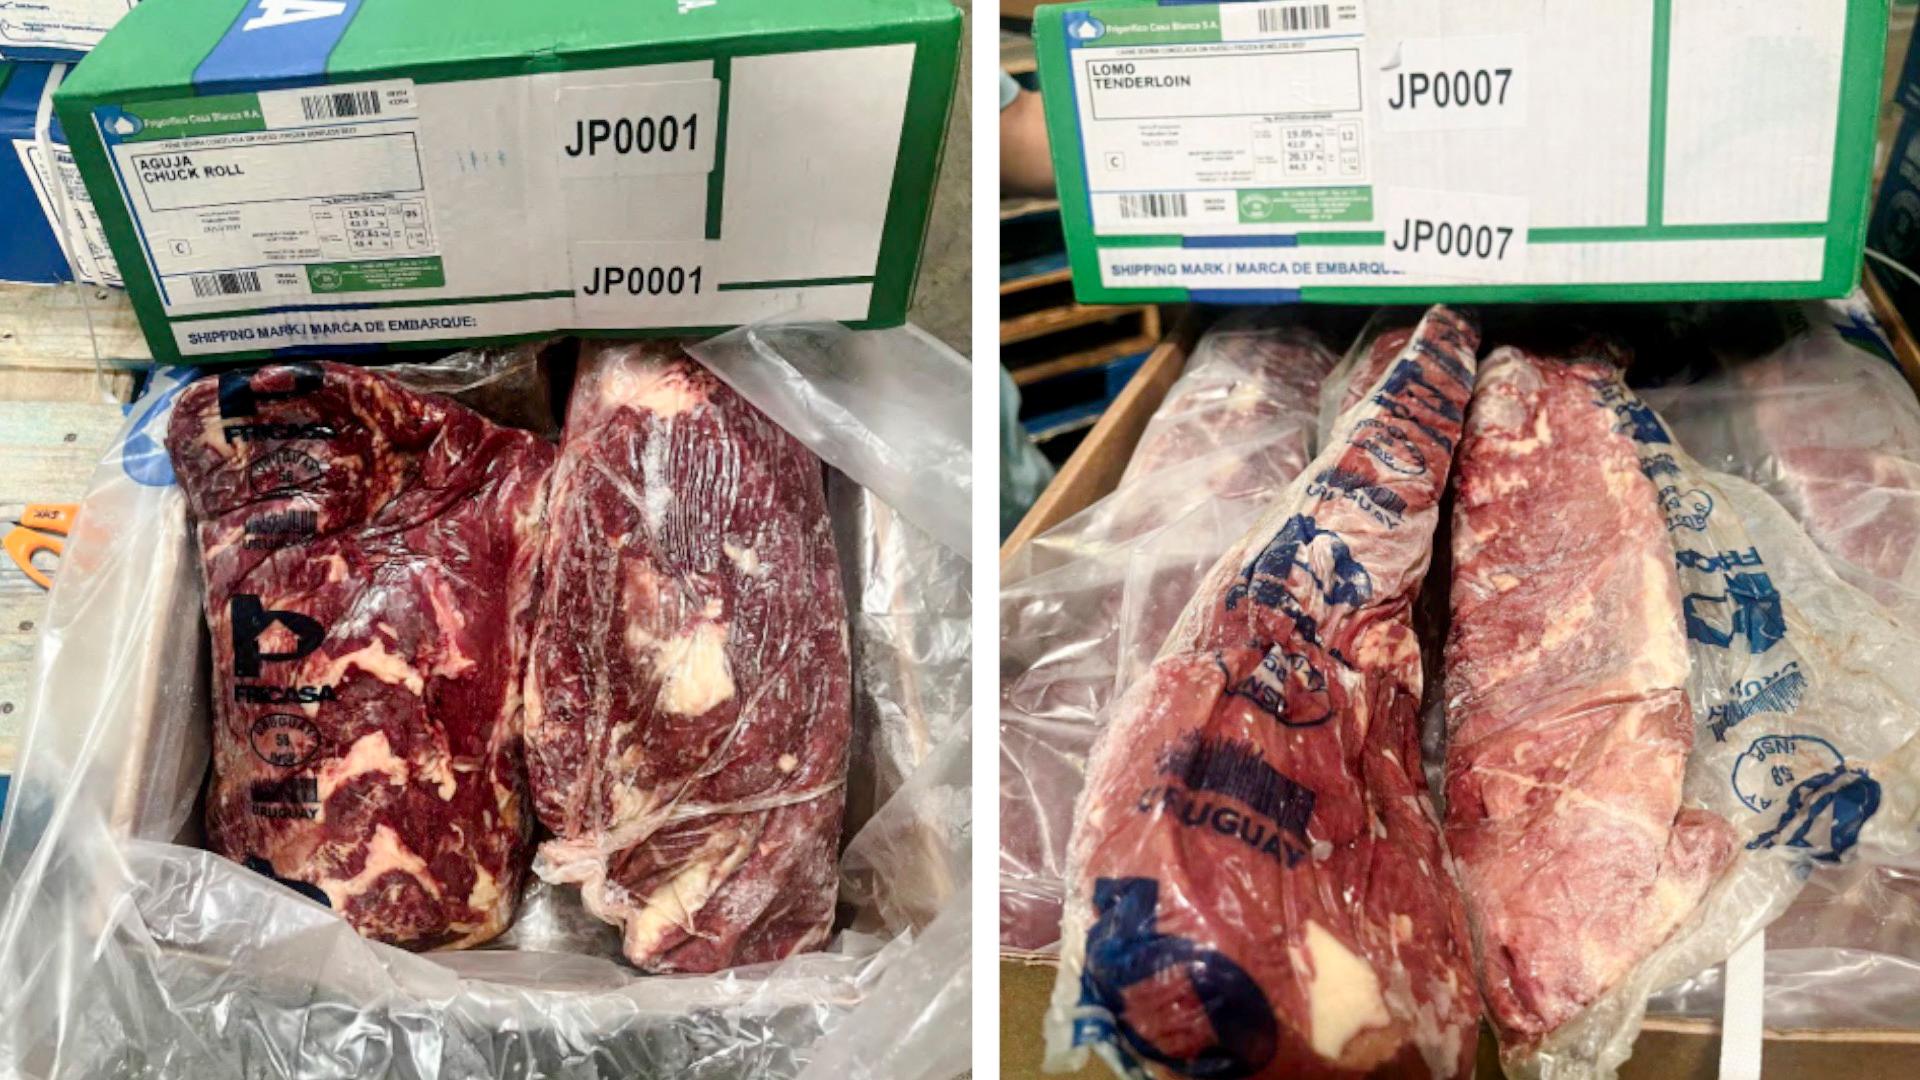 USDA Recalls More Than 20,000 Pounds of Frozen Beef Products